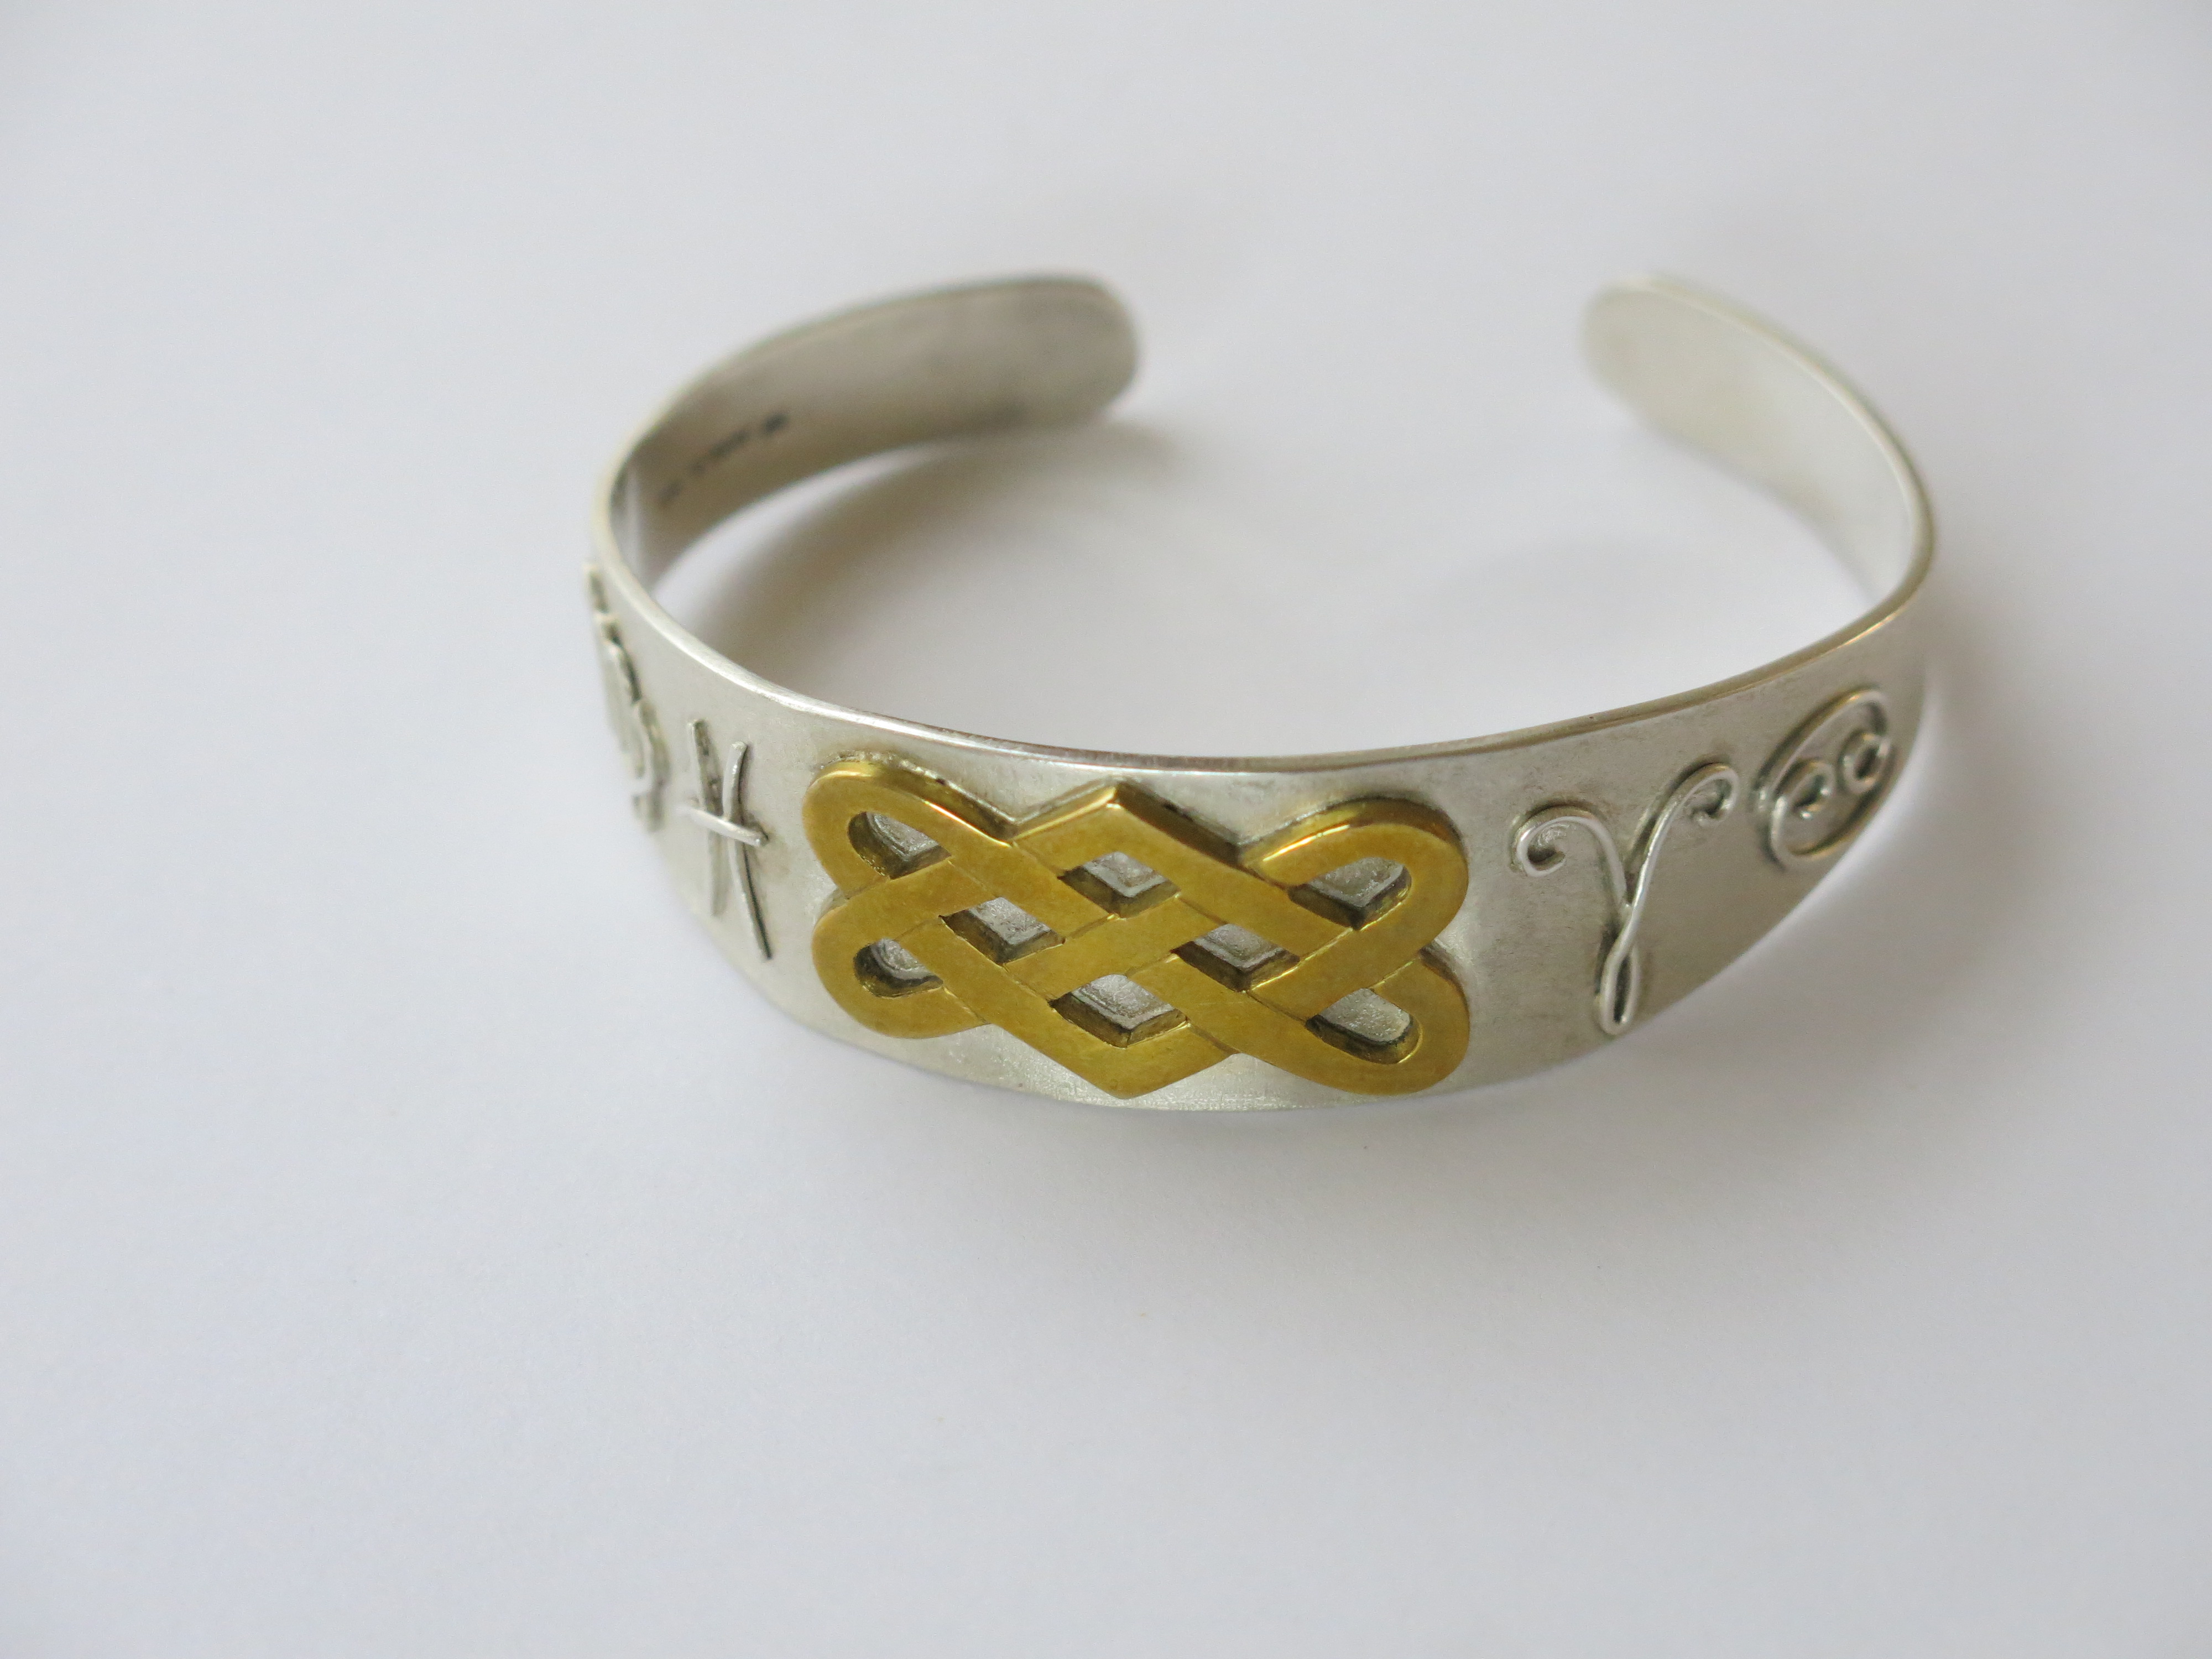 Silver bangle with brass knotwork design